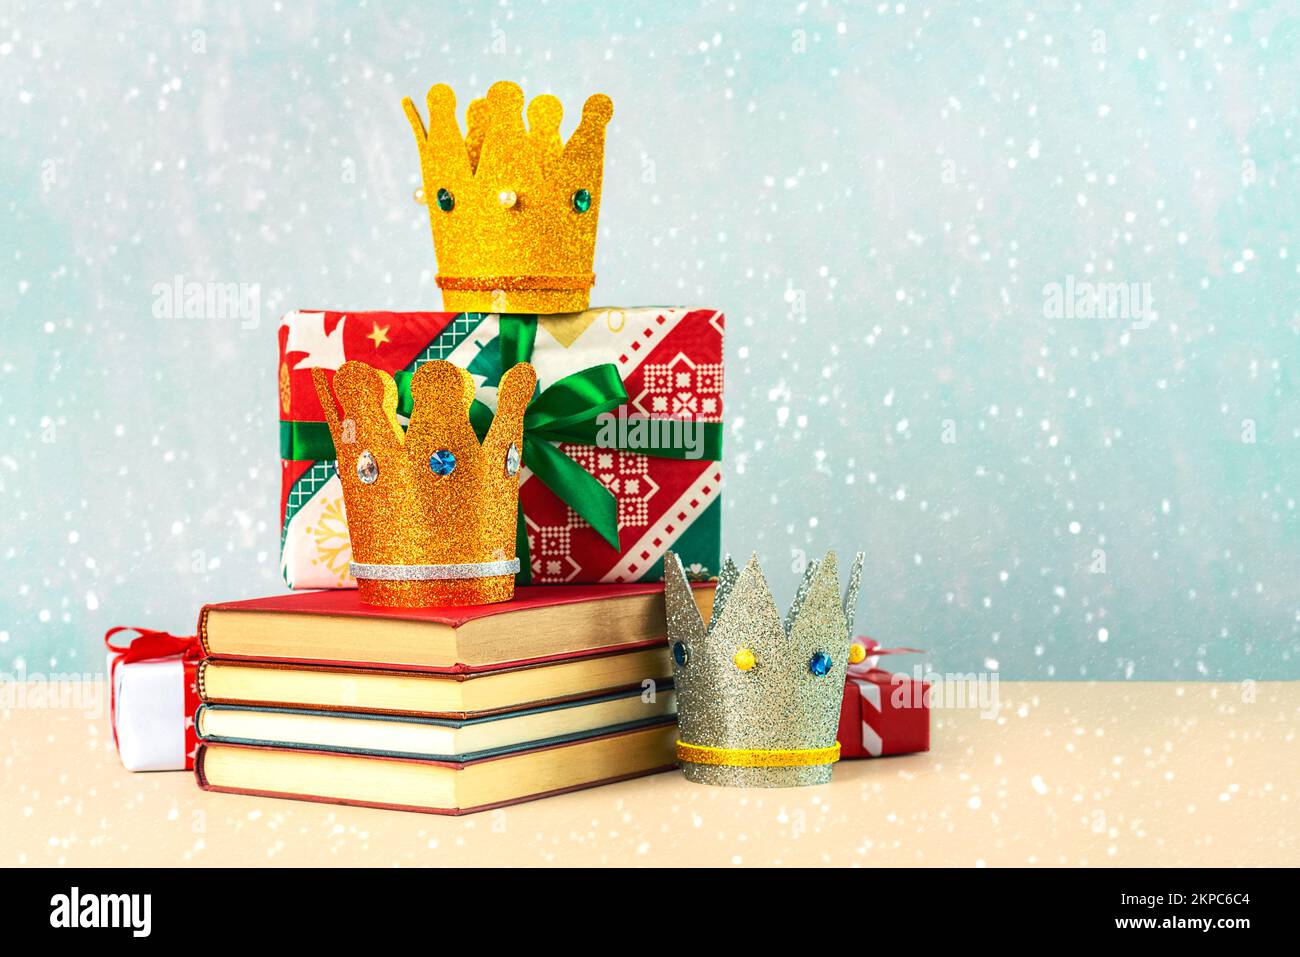 Three crowns of the three wise men with books,christmas gift boxes and snowflakes over blue background Stock Photo